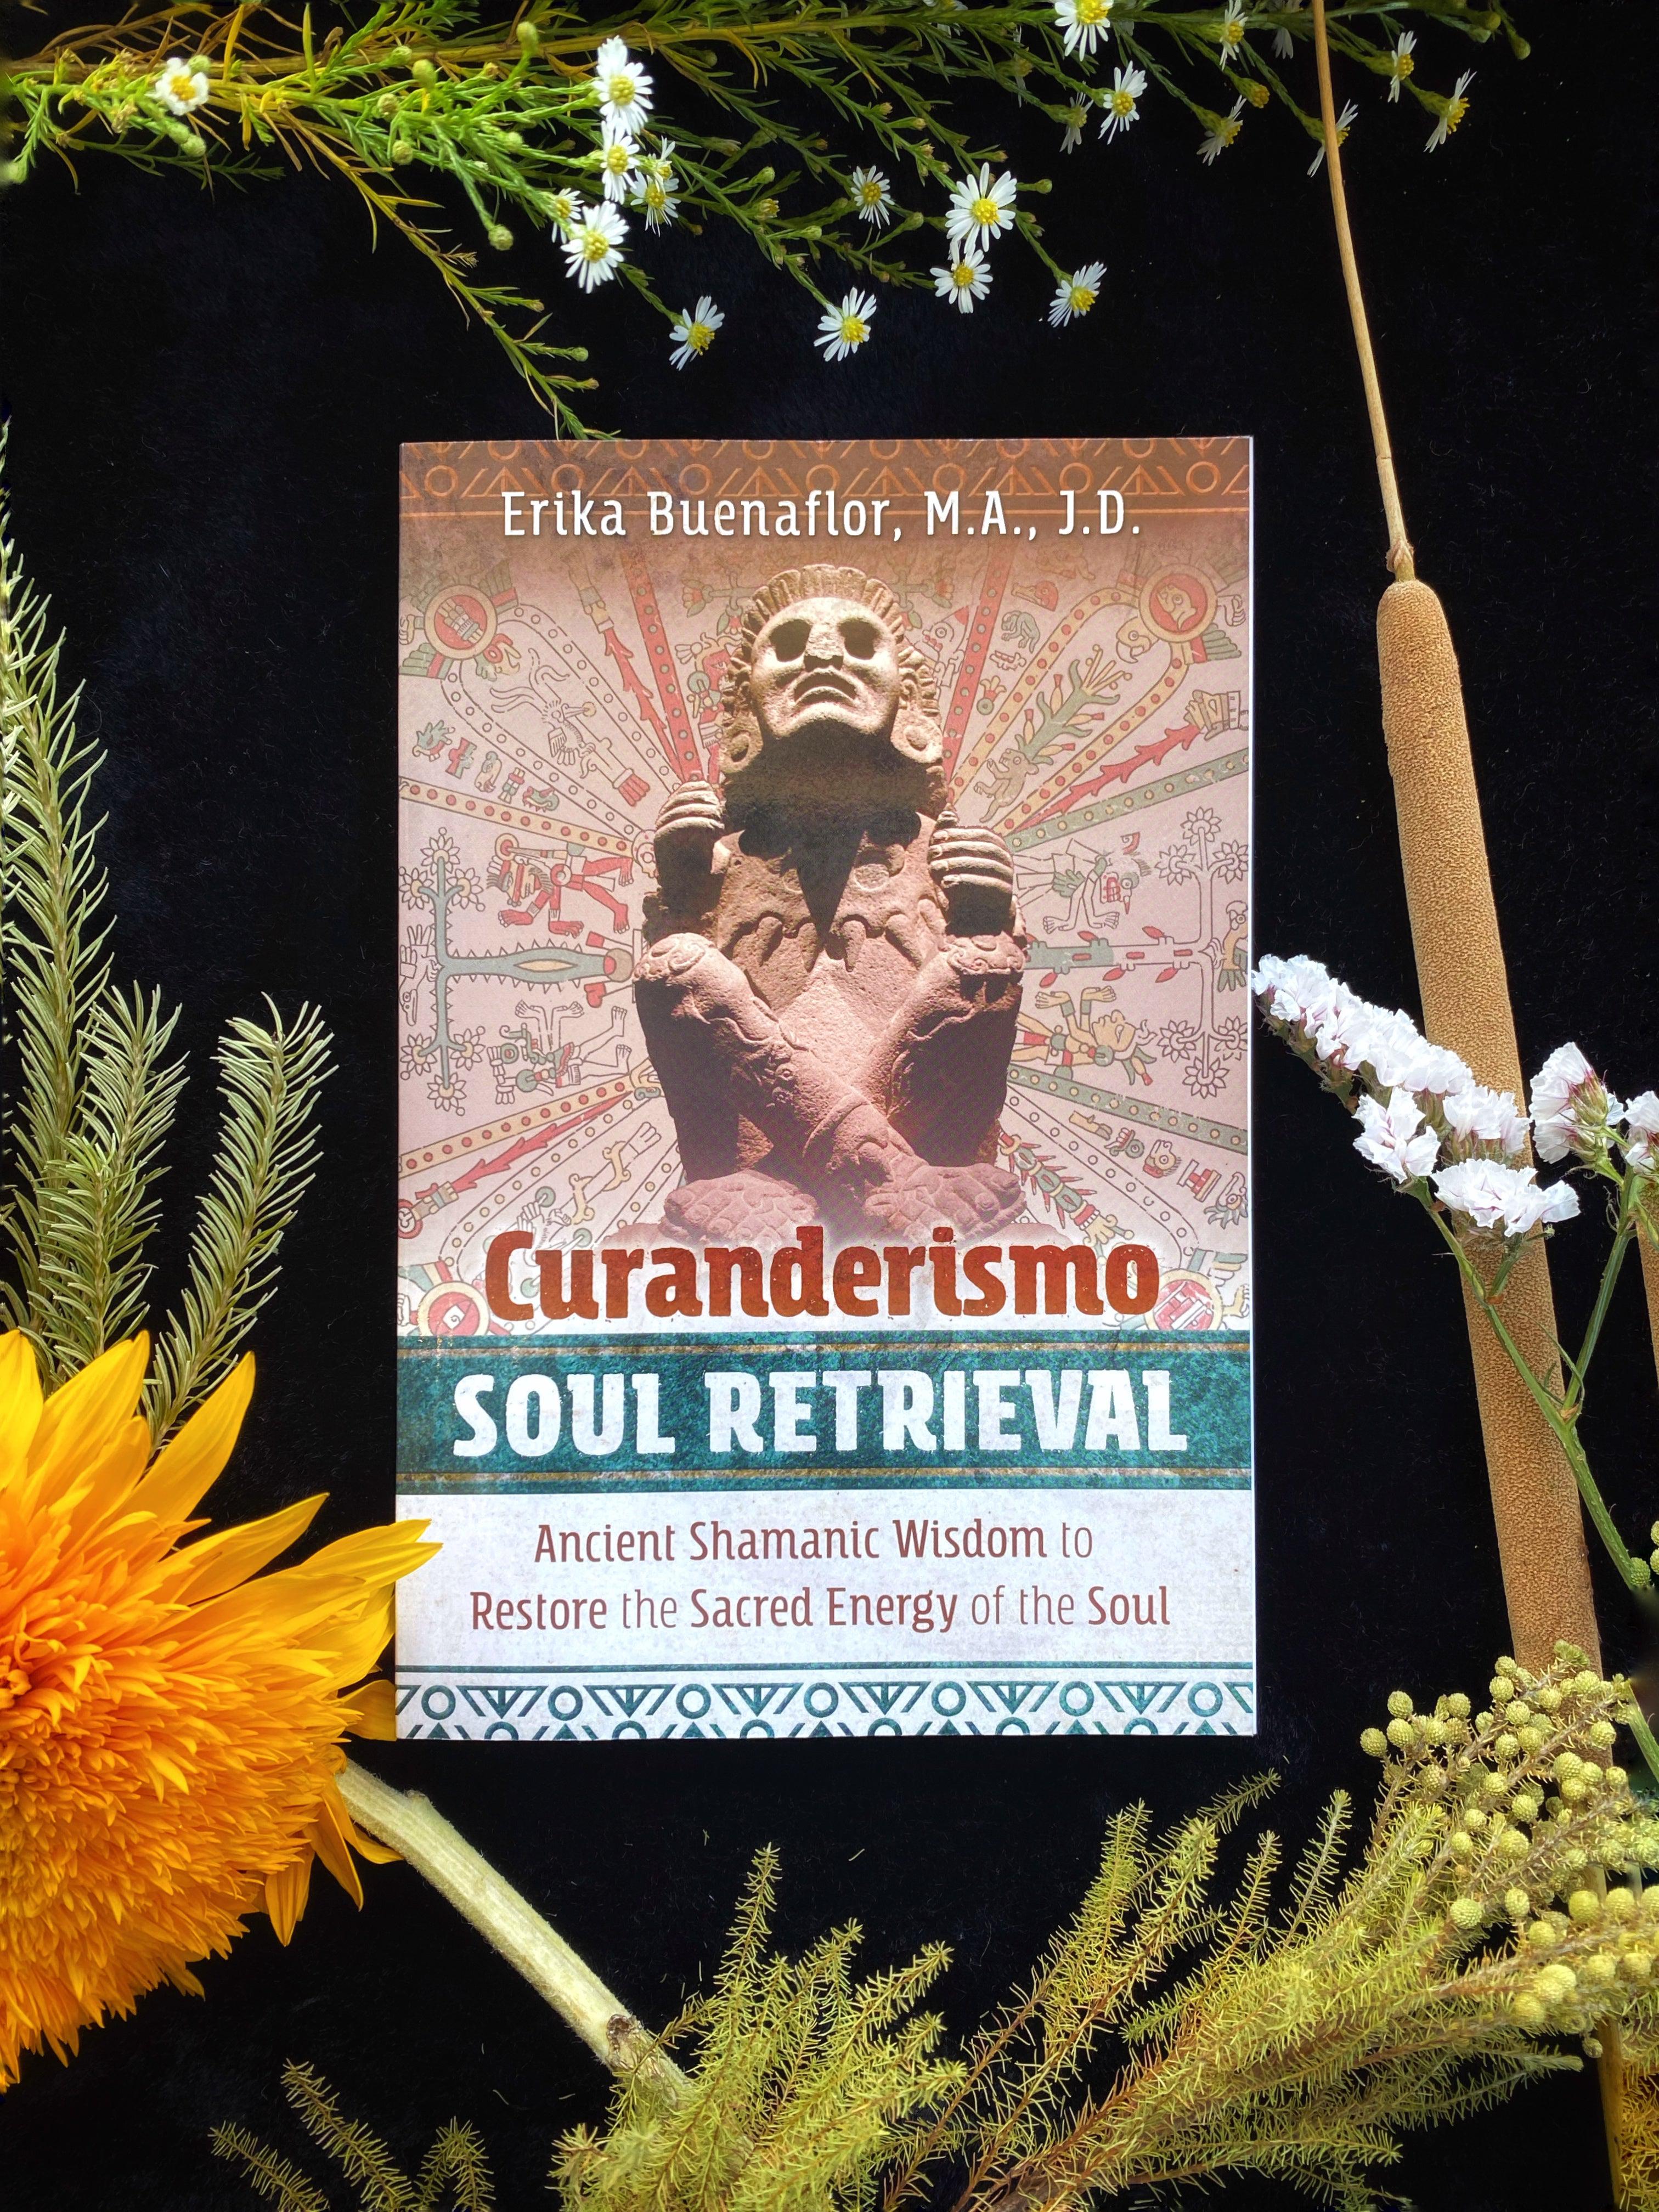 Curanderismo Soul Retrieval : Ancient Shamanic Wisdom to Restore the Sacred Energy of the Soul - Keven Craft Rituals